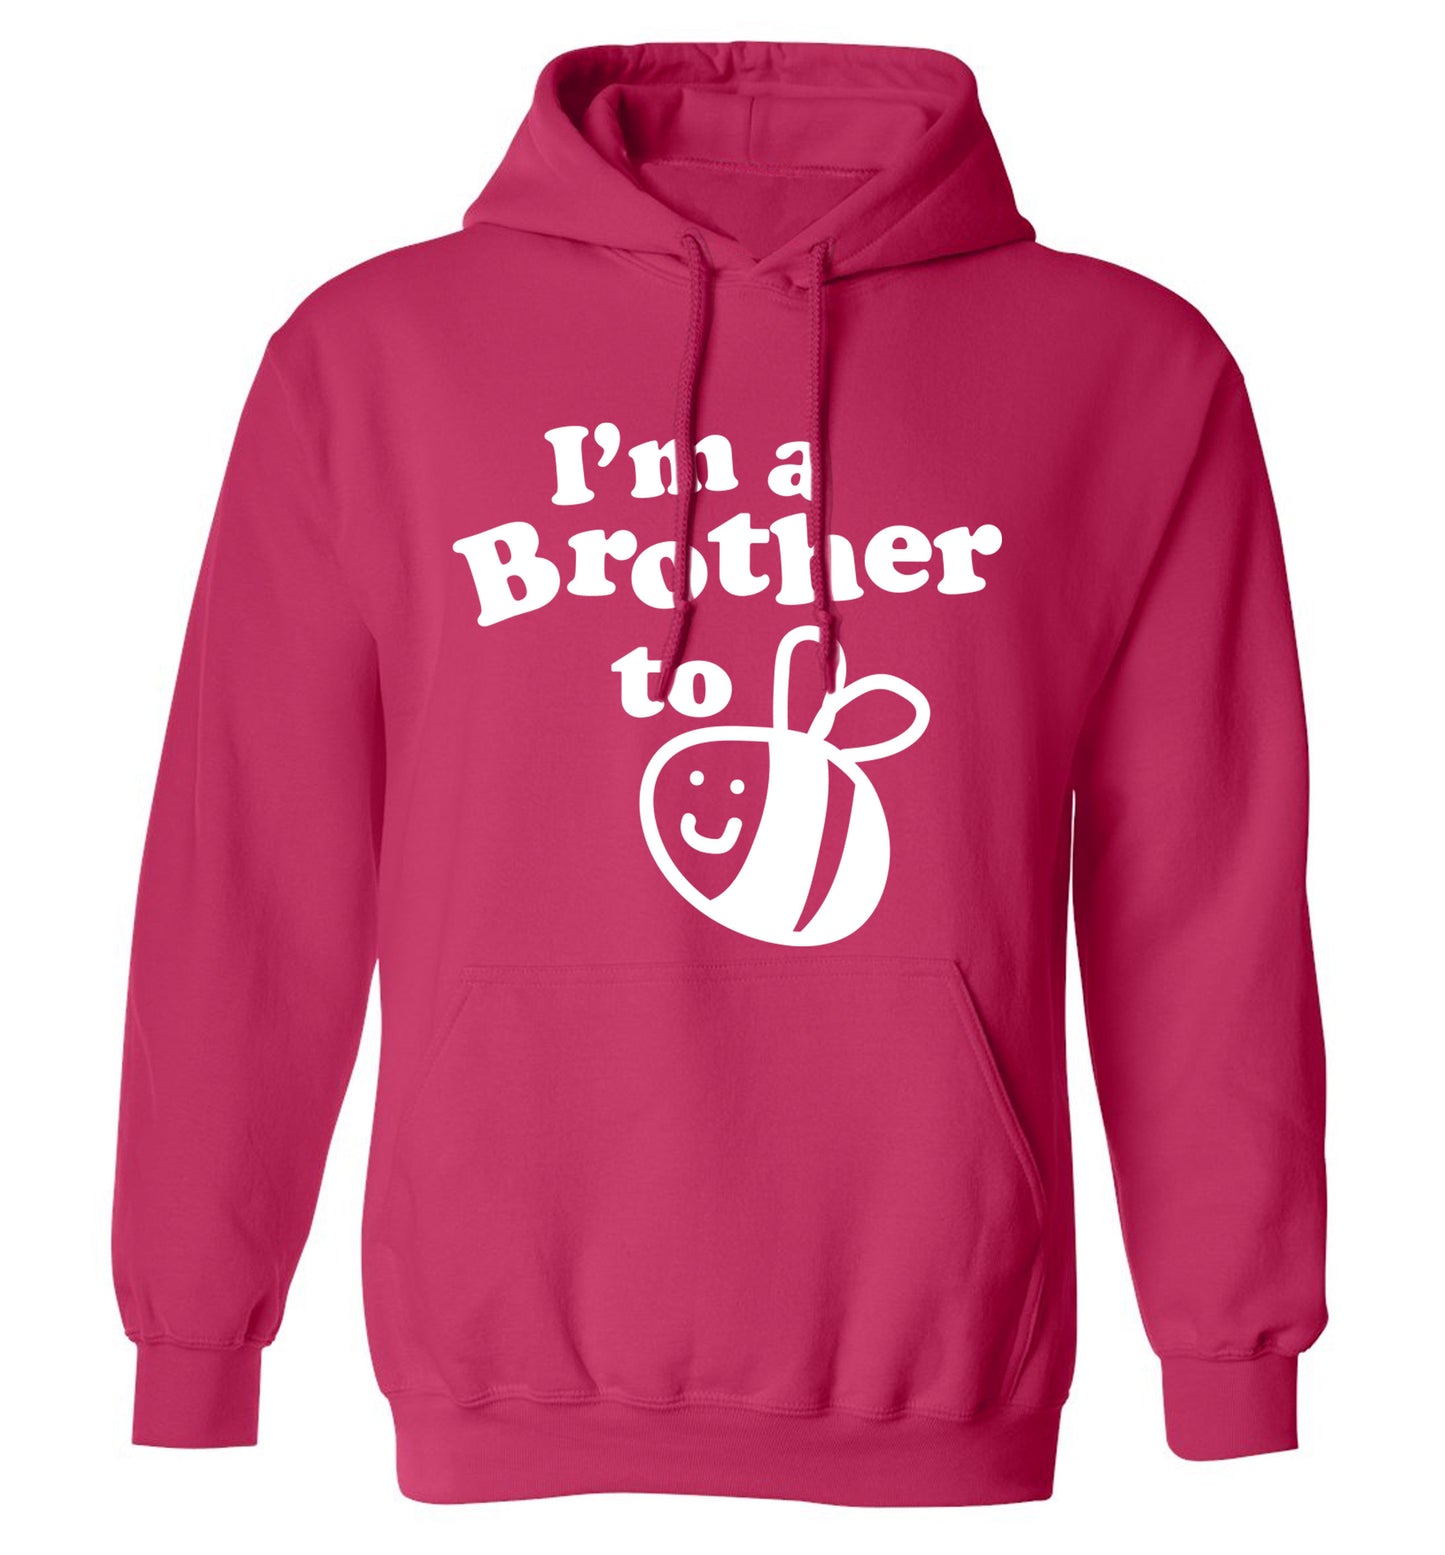 I'm a brother to be adults unisex pink hoodie 2XL